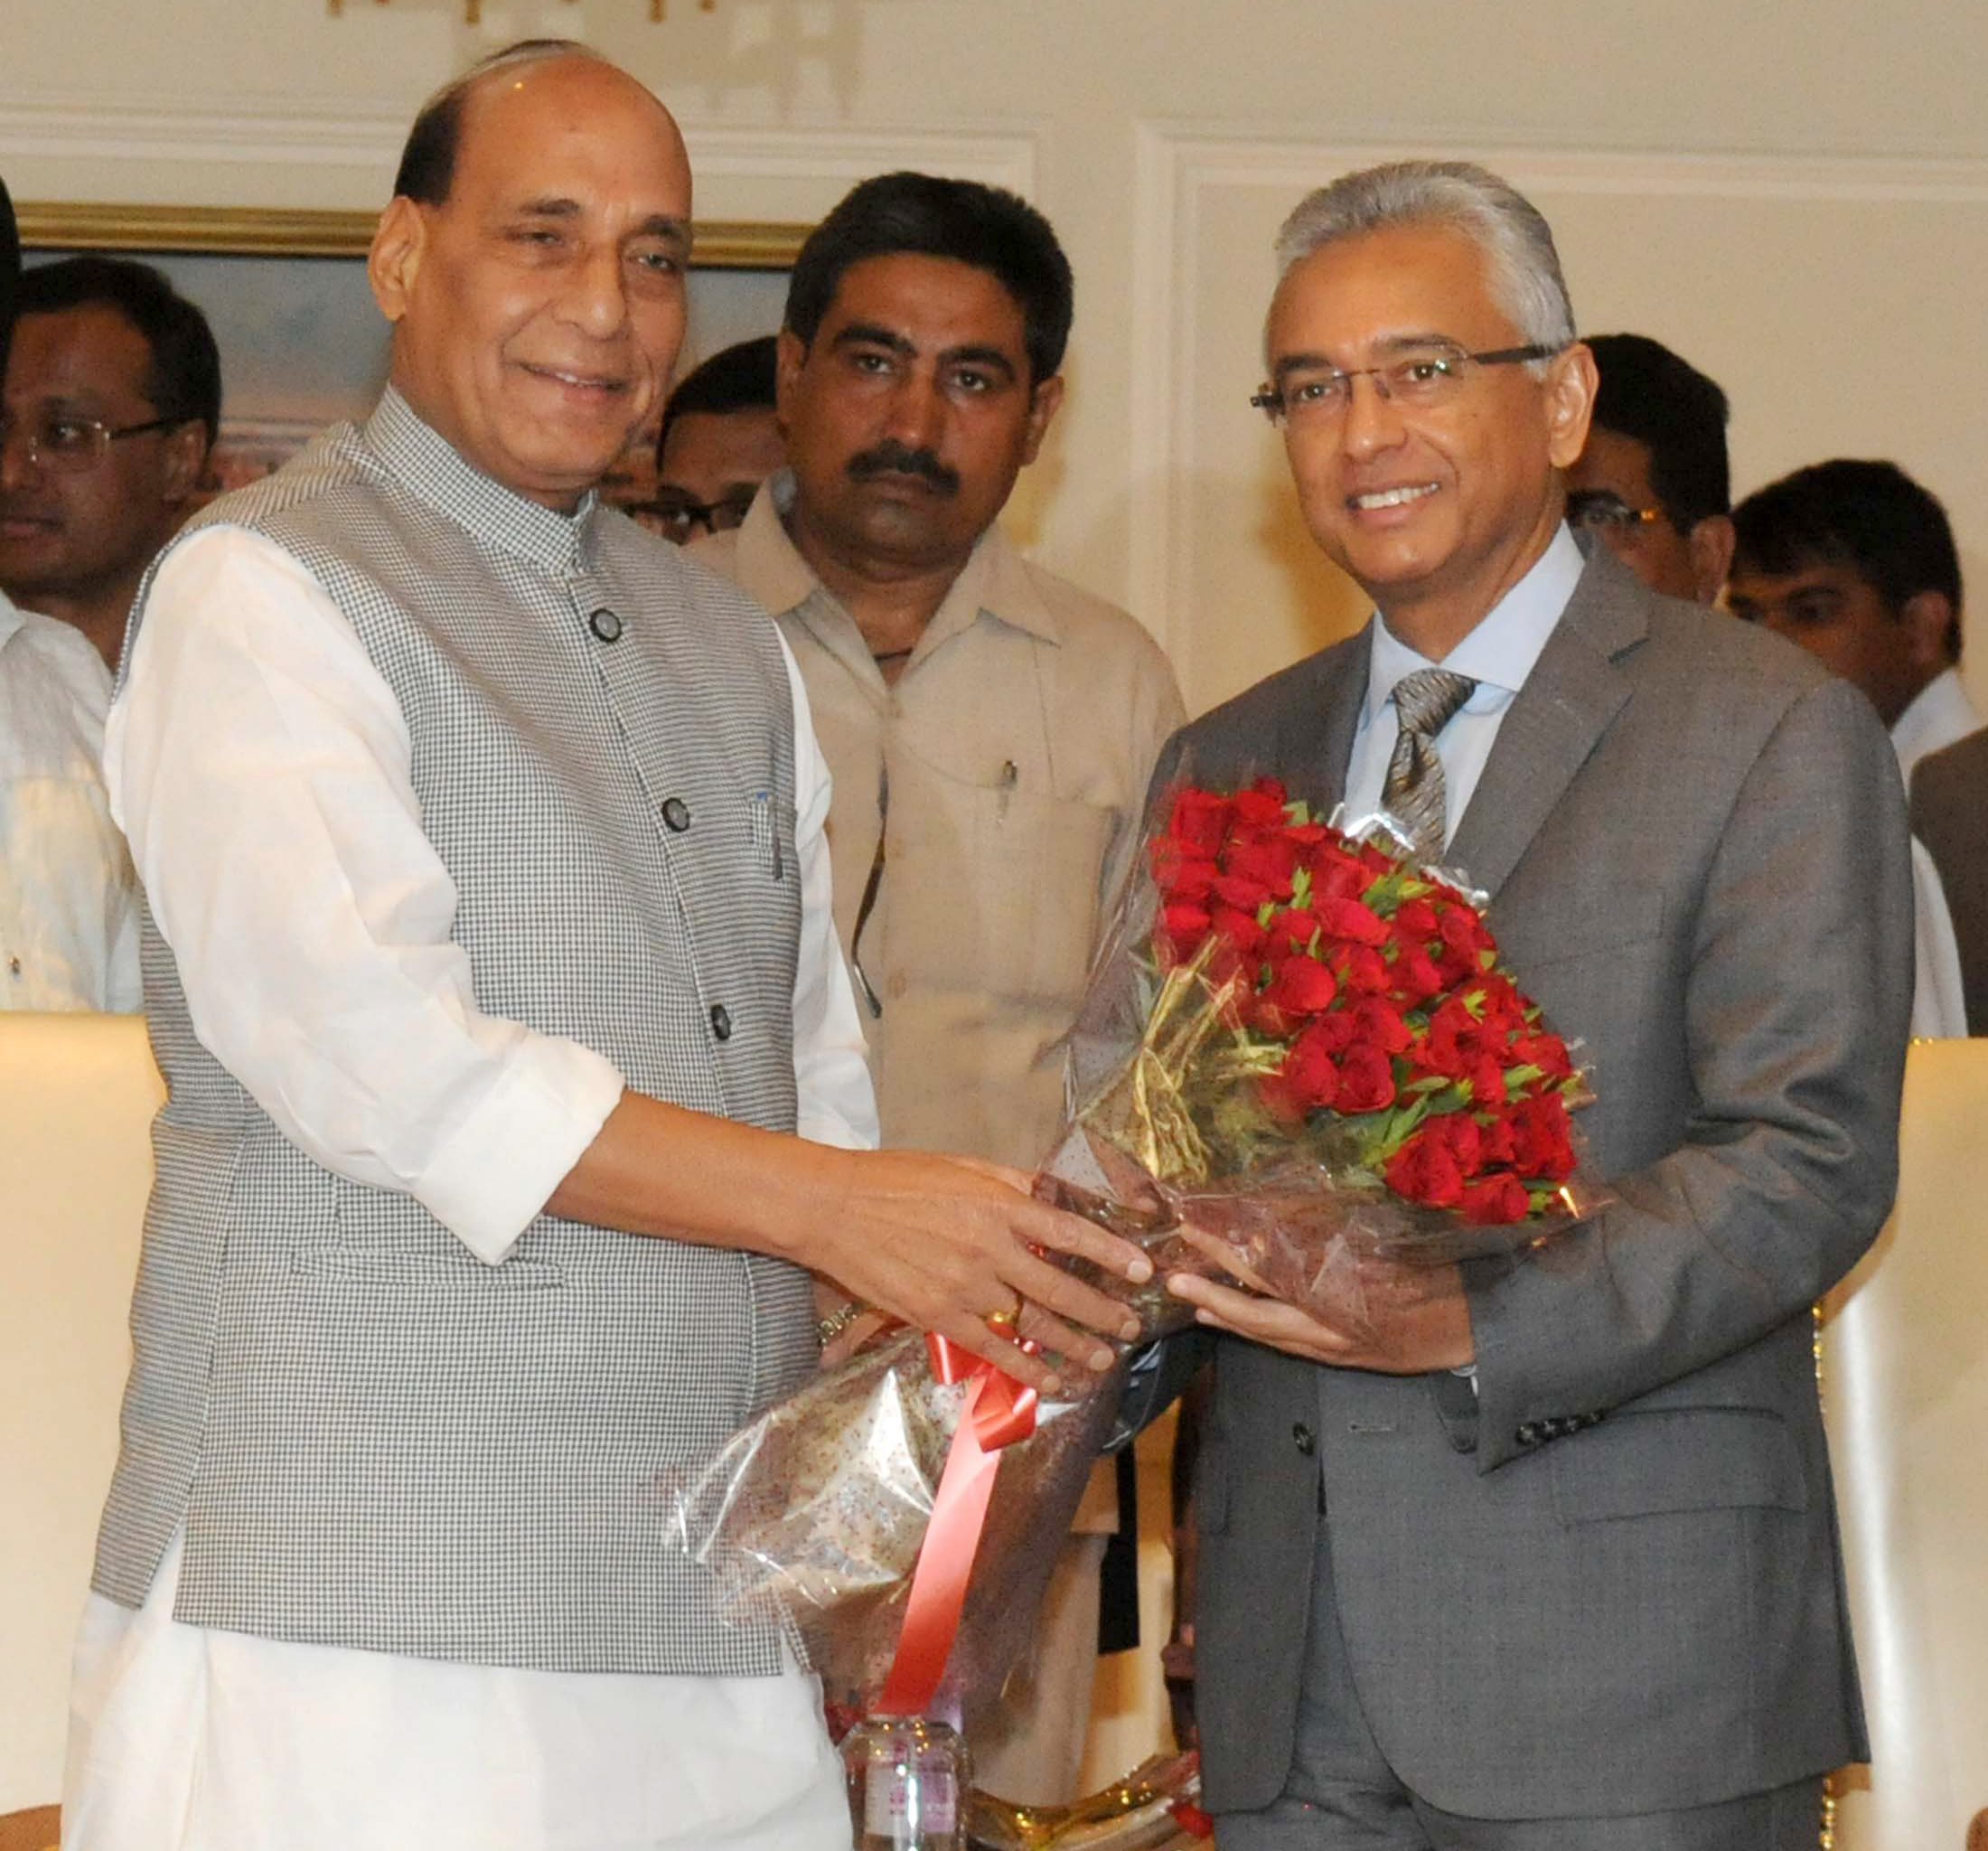 The Union Home Minister, Shri Rajnath Singh meeting the Prime Minister of the Republic of Mauritius, Mr. Pravind Kumar Jugnauth, in New Delhi on May 26, 2017.